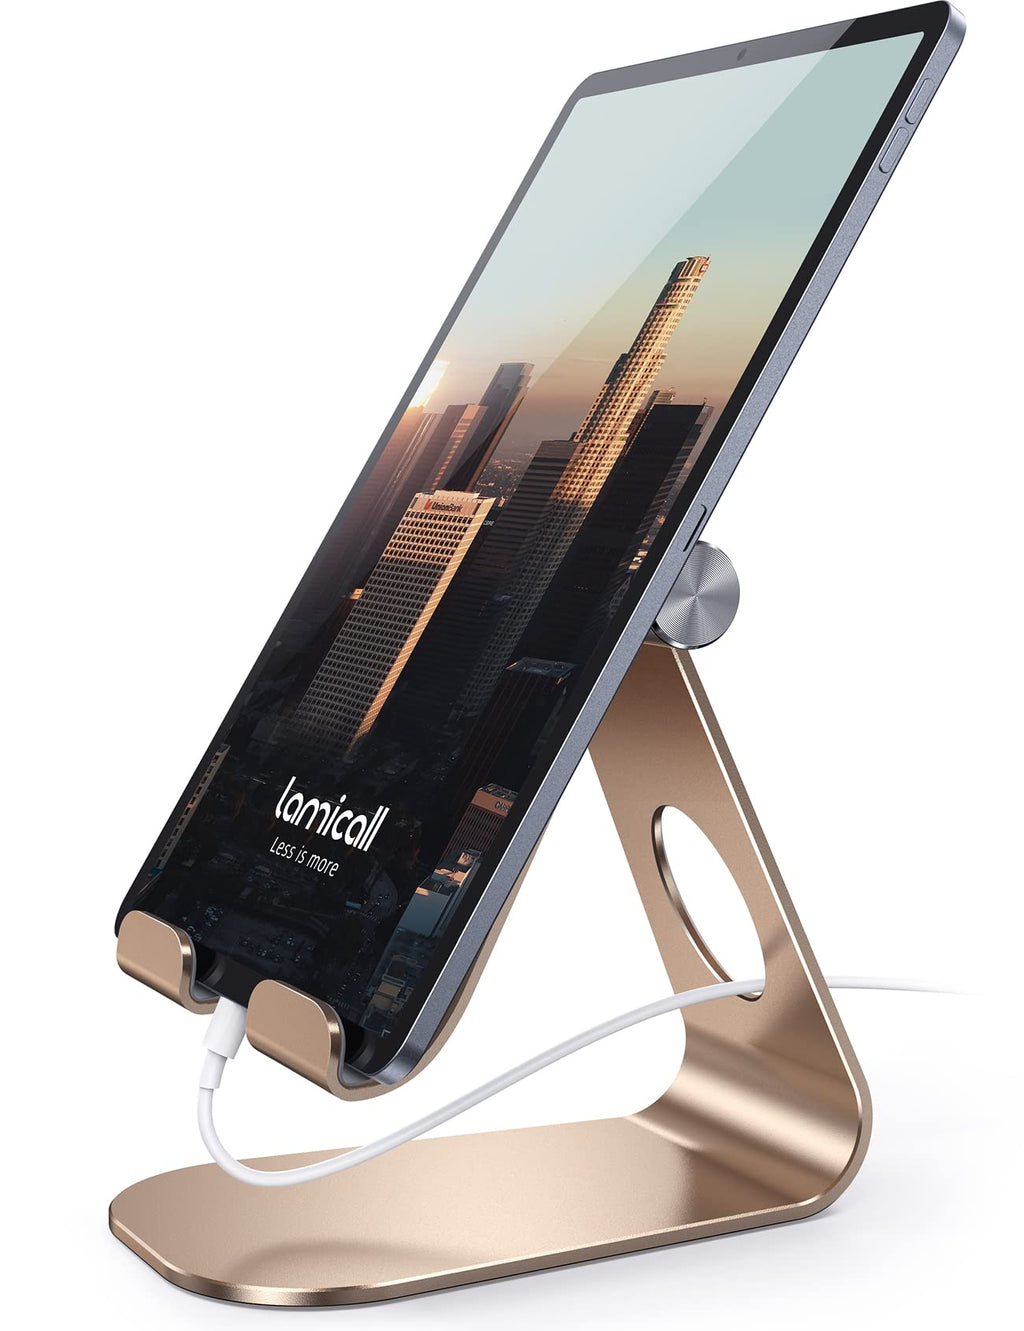  [AUSTRALIA] - Tablet Stand Adjustable, Lamicall Tablet Stand : Desktop Stand Holder Dock Compatible with Tablet Such as iPad Pro 9.7, 10.5, 12.9 Air Mini 4 3 2, Kindle, Nexus, Tab, E-Reader (4-13") - Gold